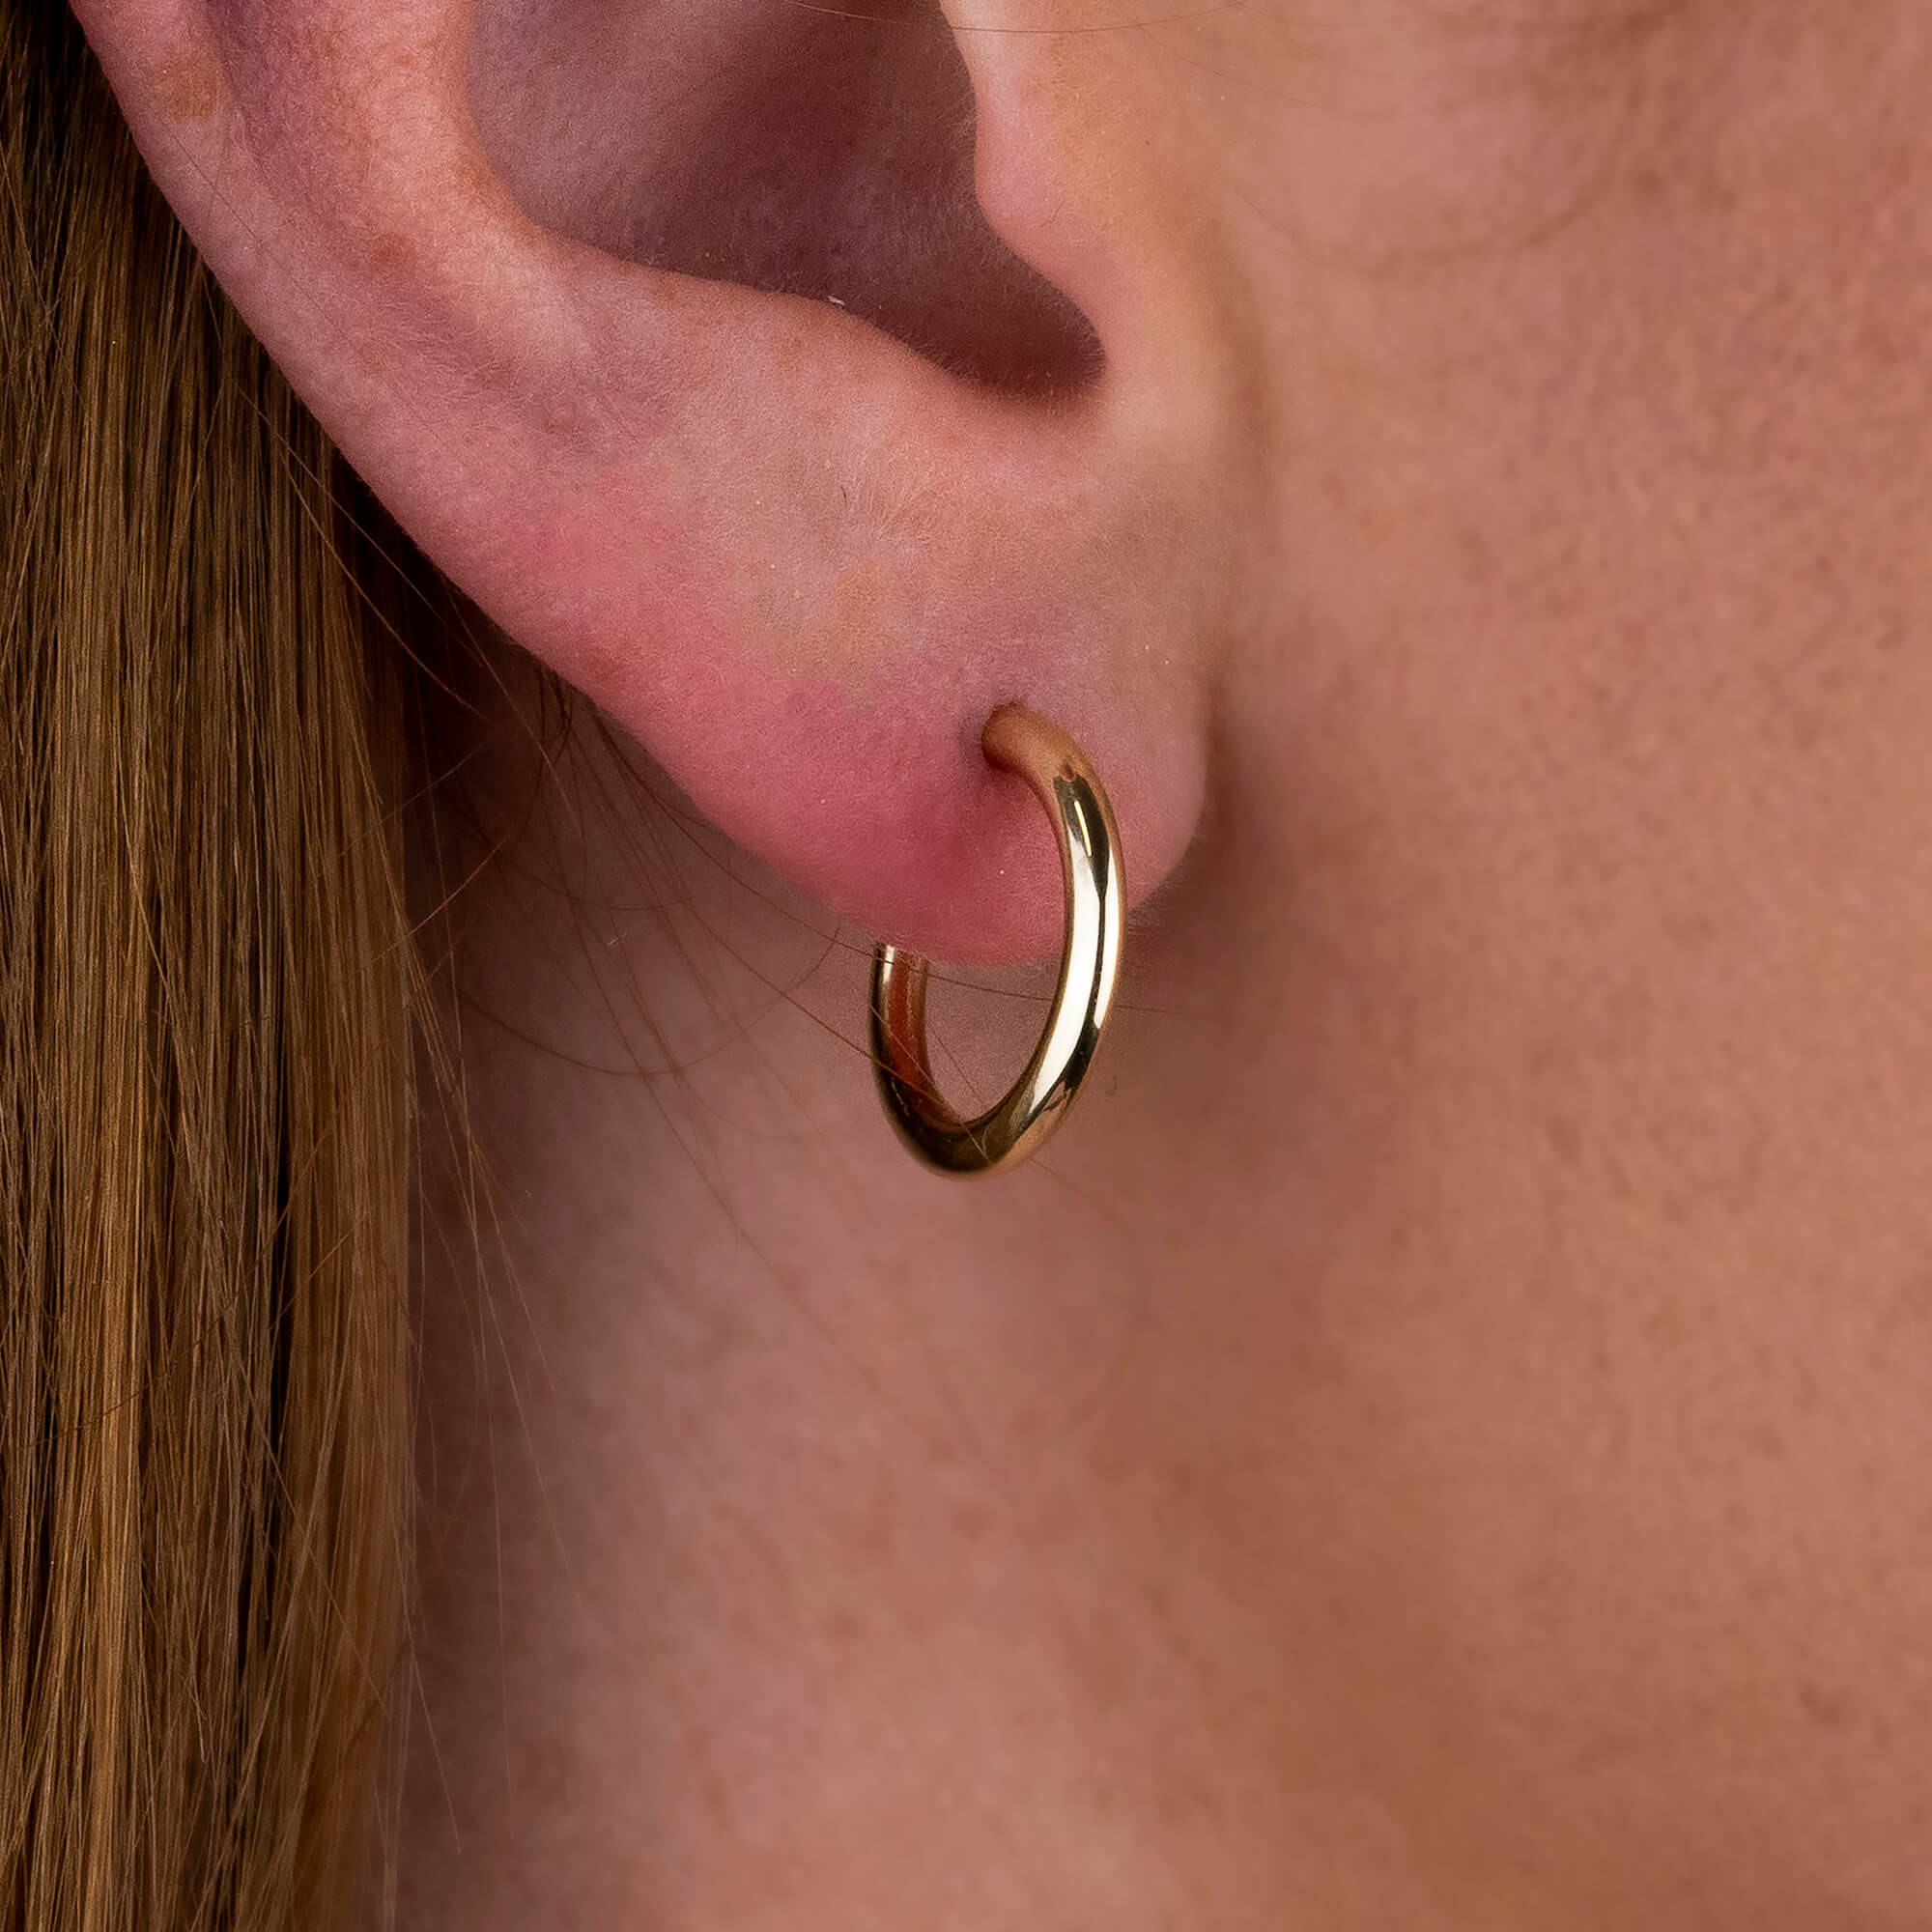 Thick Gold Hoop Earrings - 14k Solid Gold | Helen Ficalora